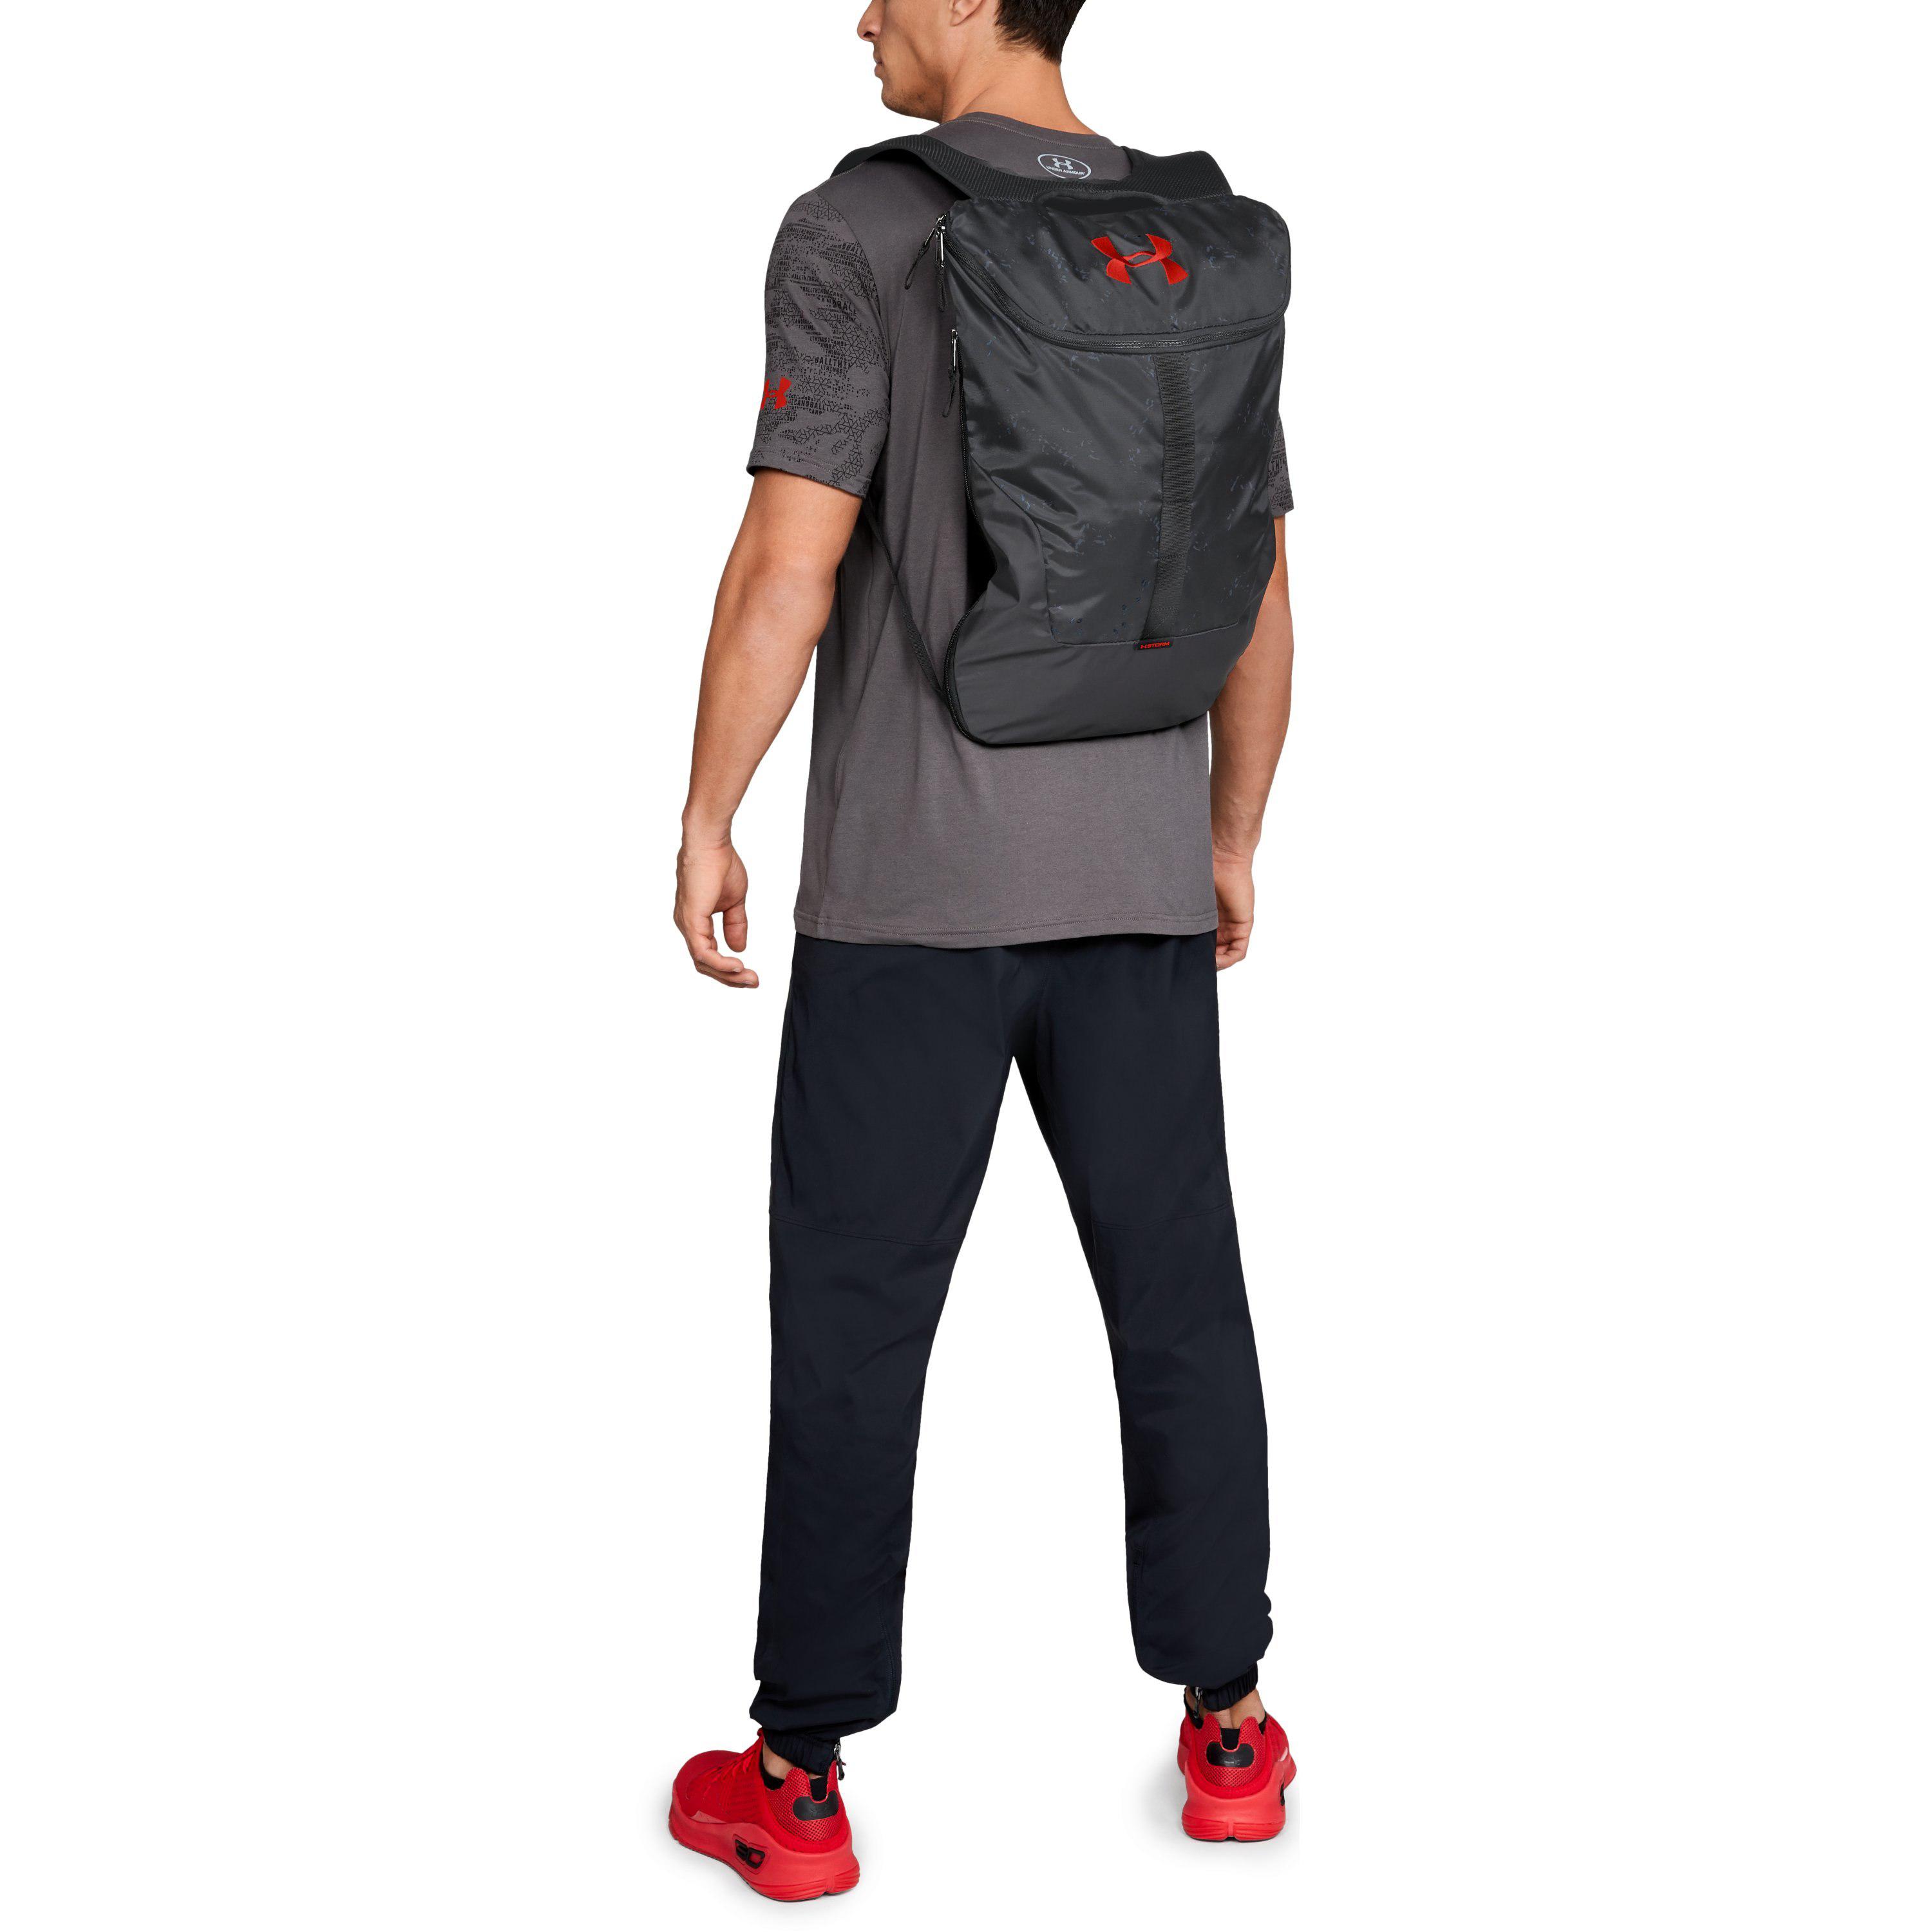 Under Armour Ua Expandable Sackpack in Black for Men - Lyst